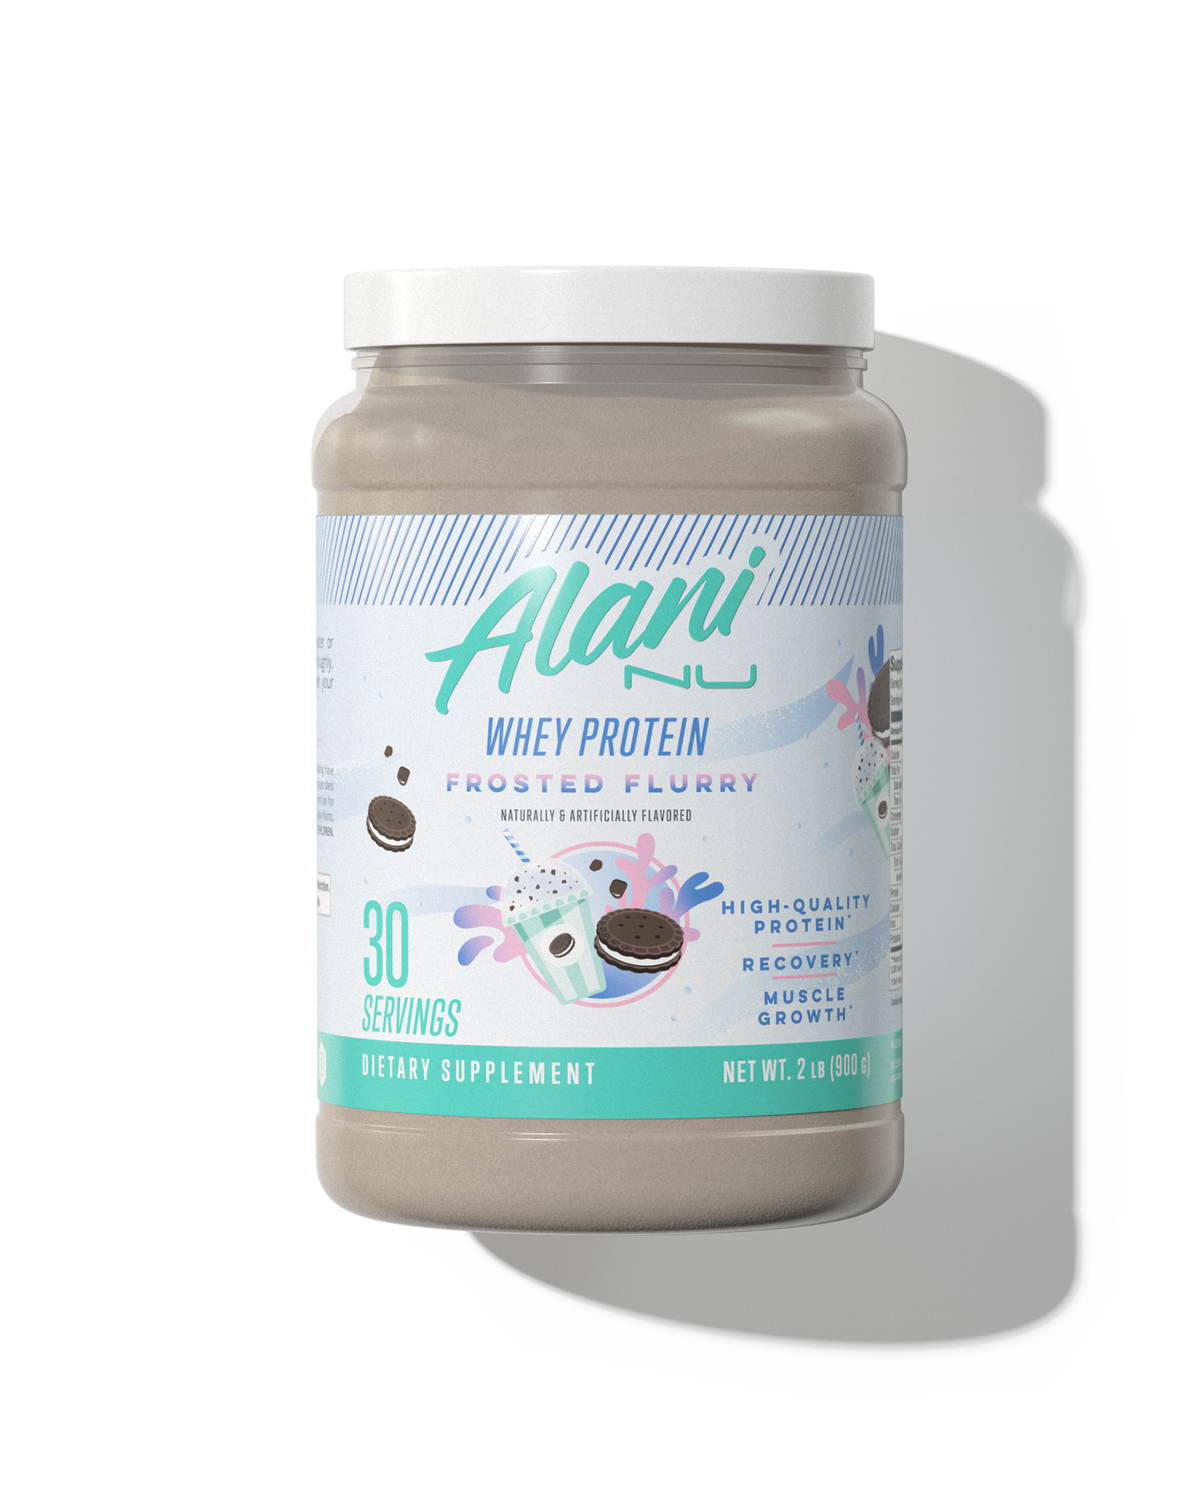 A 30 serving container of Whey Protein in Frosted Flurry flavor.